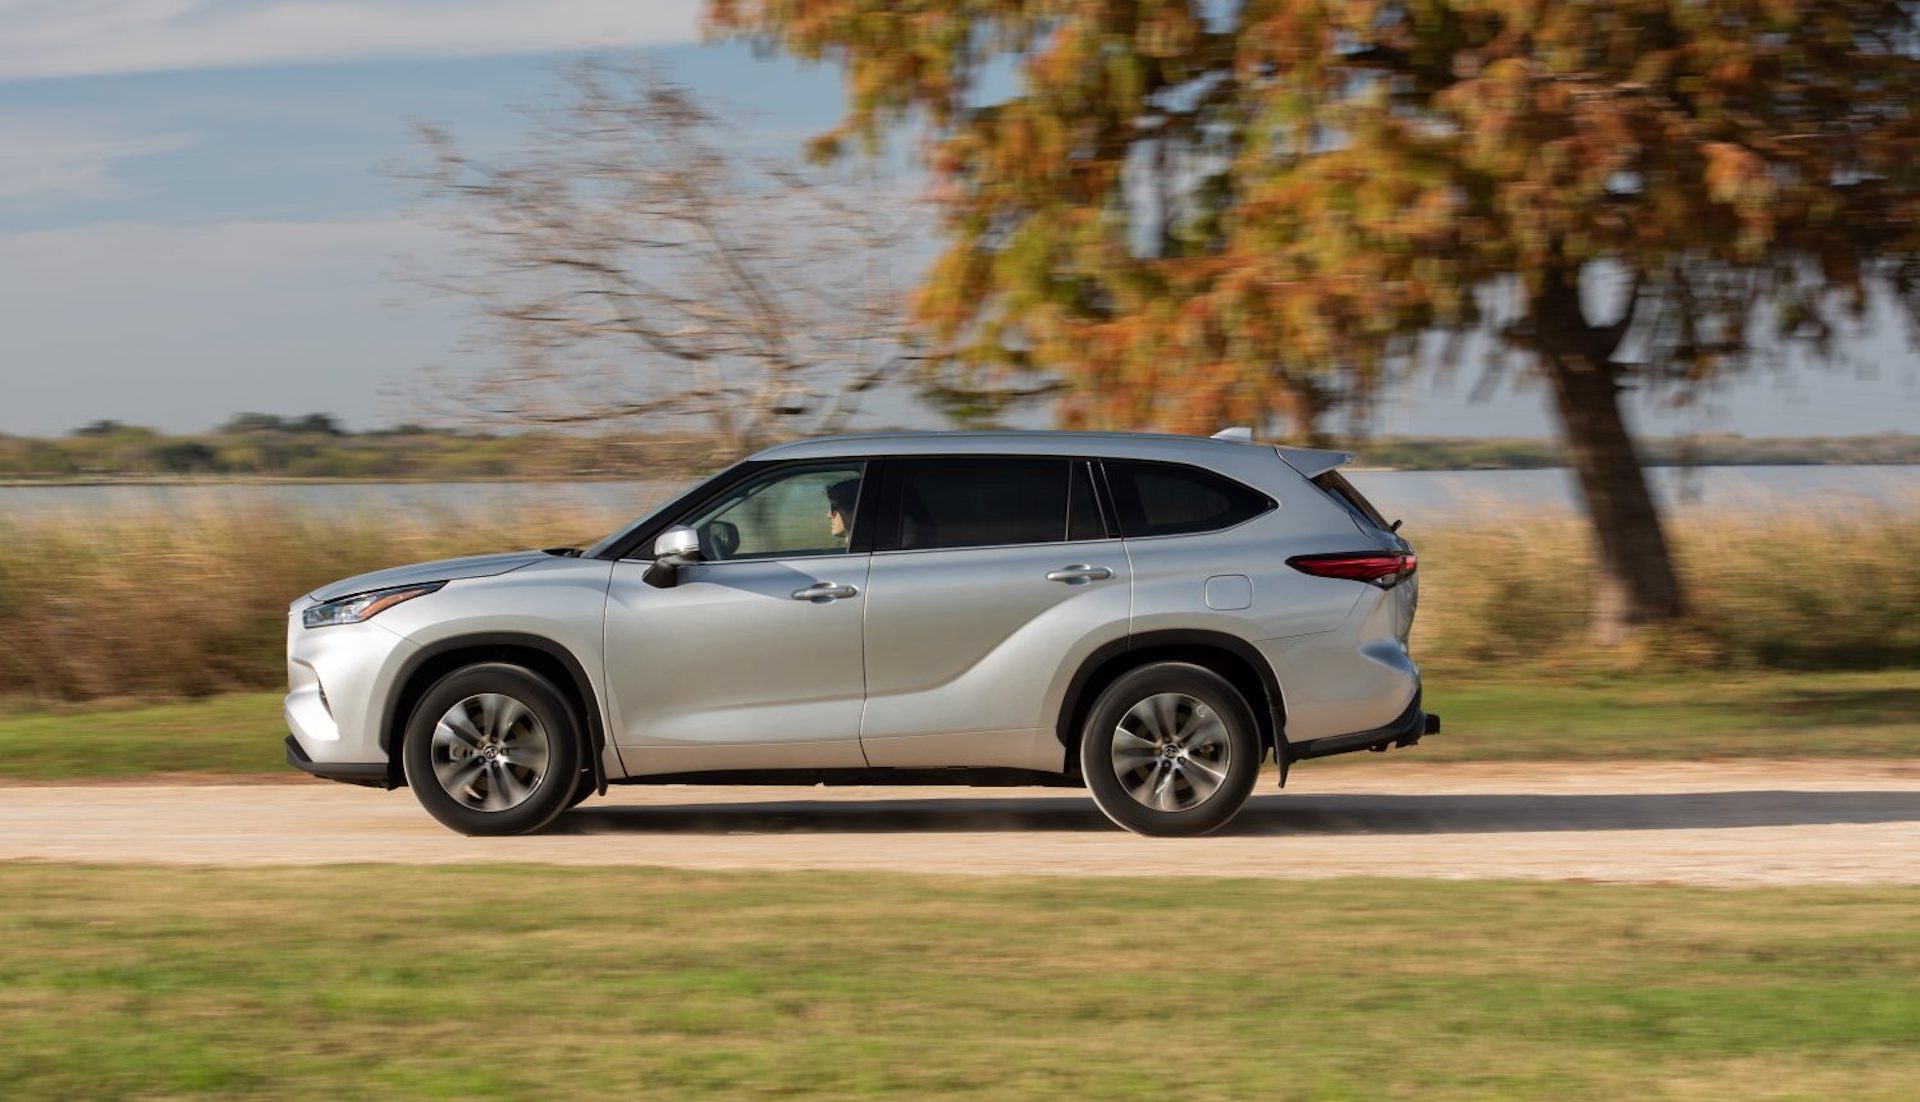 2022 Toyota Highlander Review, Ratings ...